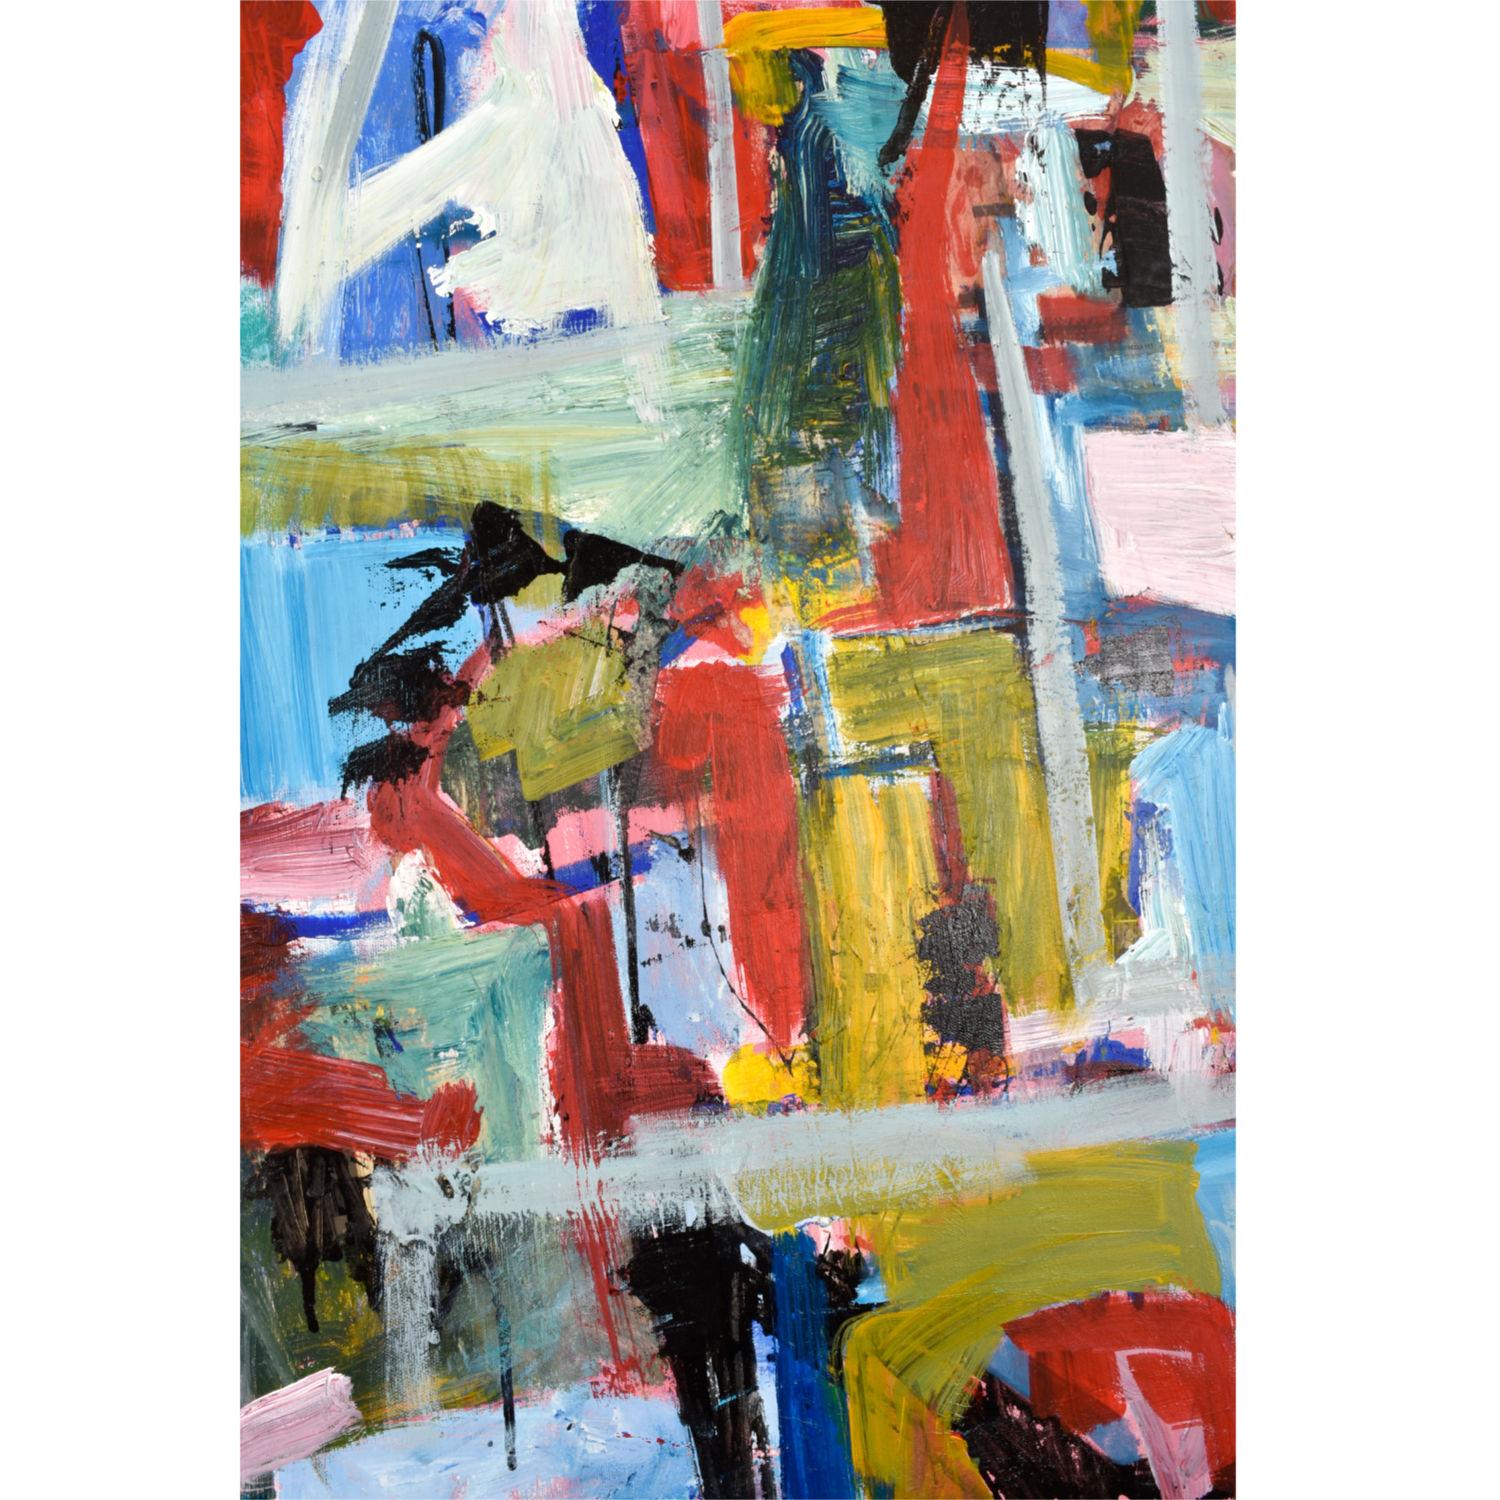 American D Puertas Abstract Expressionist Painting in Red Blue and Yellow